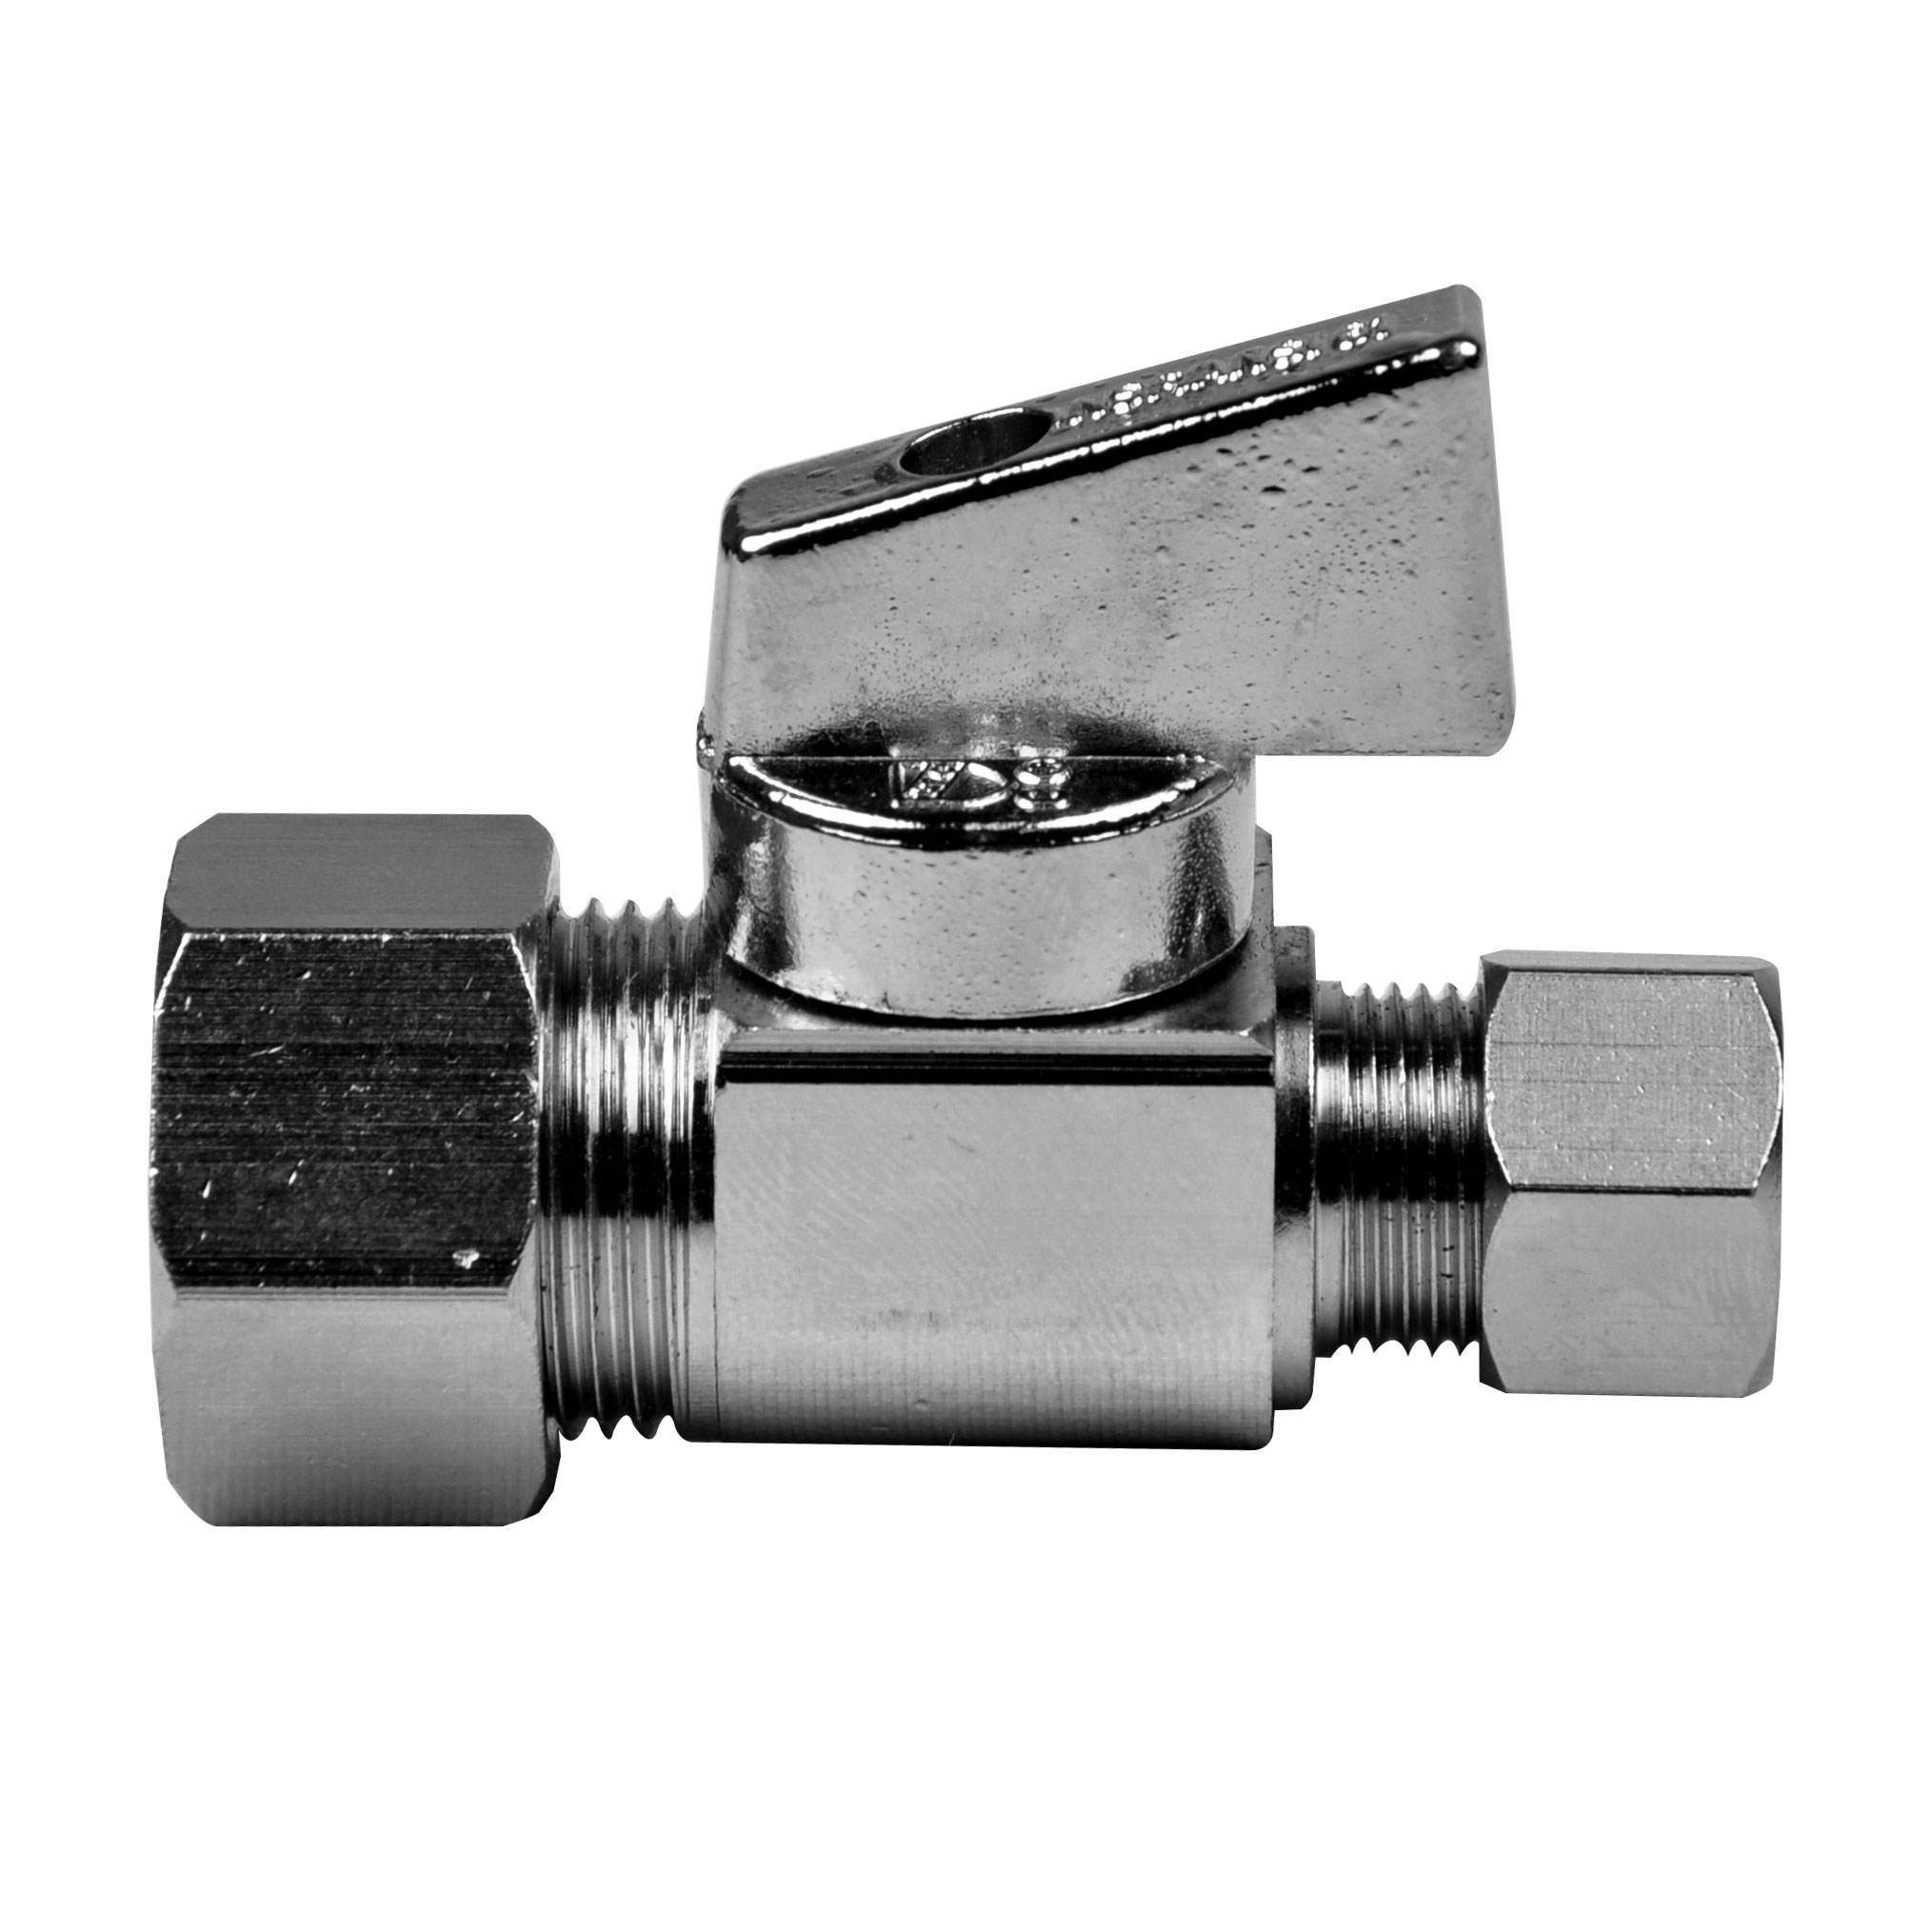 LSP V-103-S-LL Valve with Straight Stop